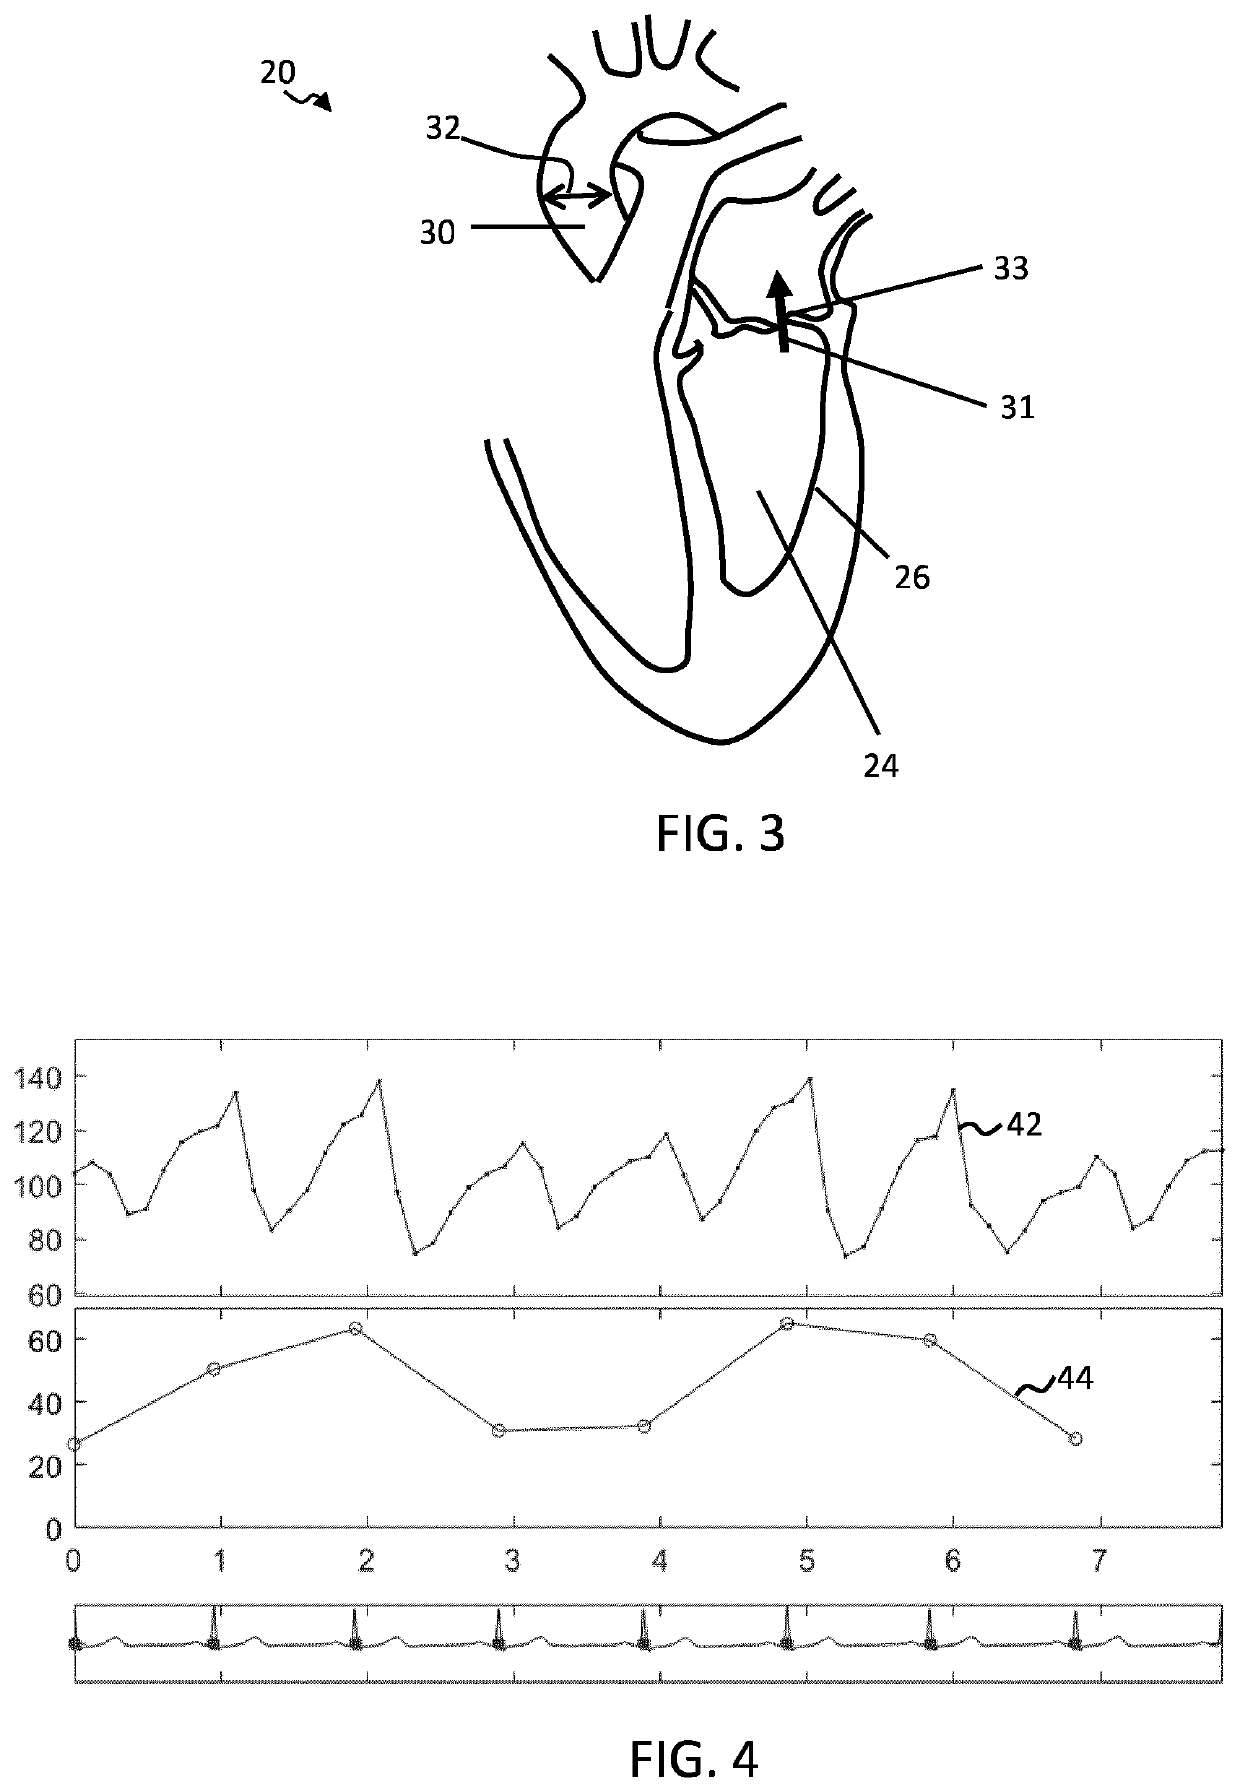 Ultrasound imaging system and method